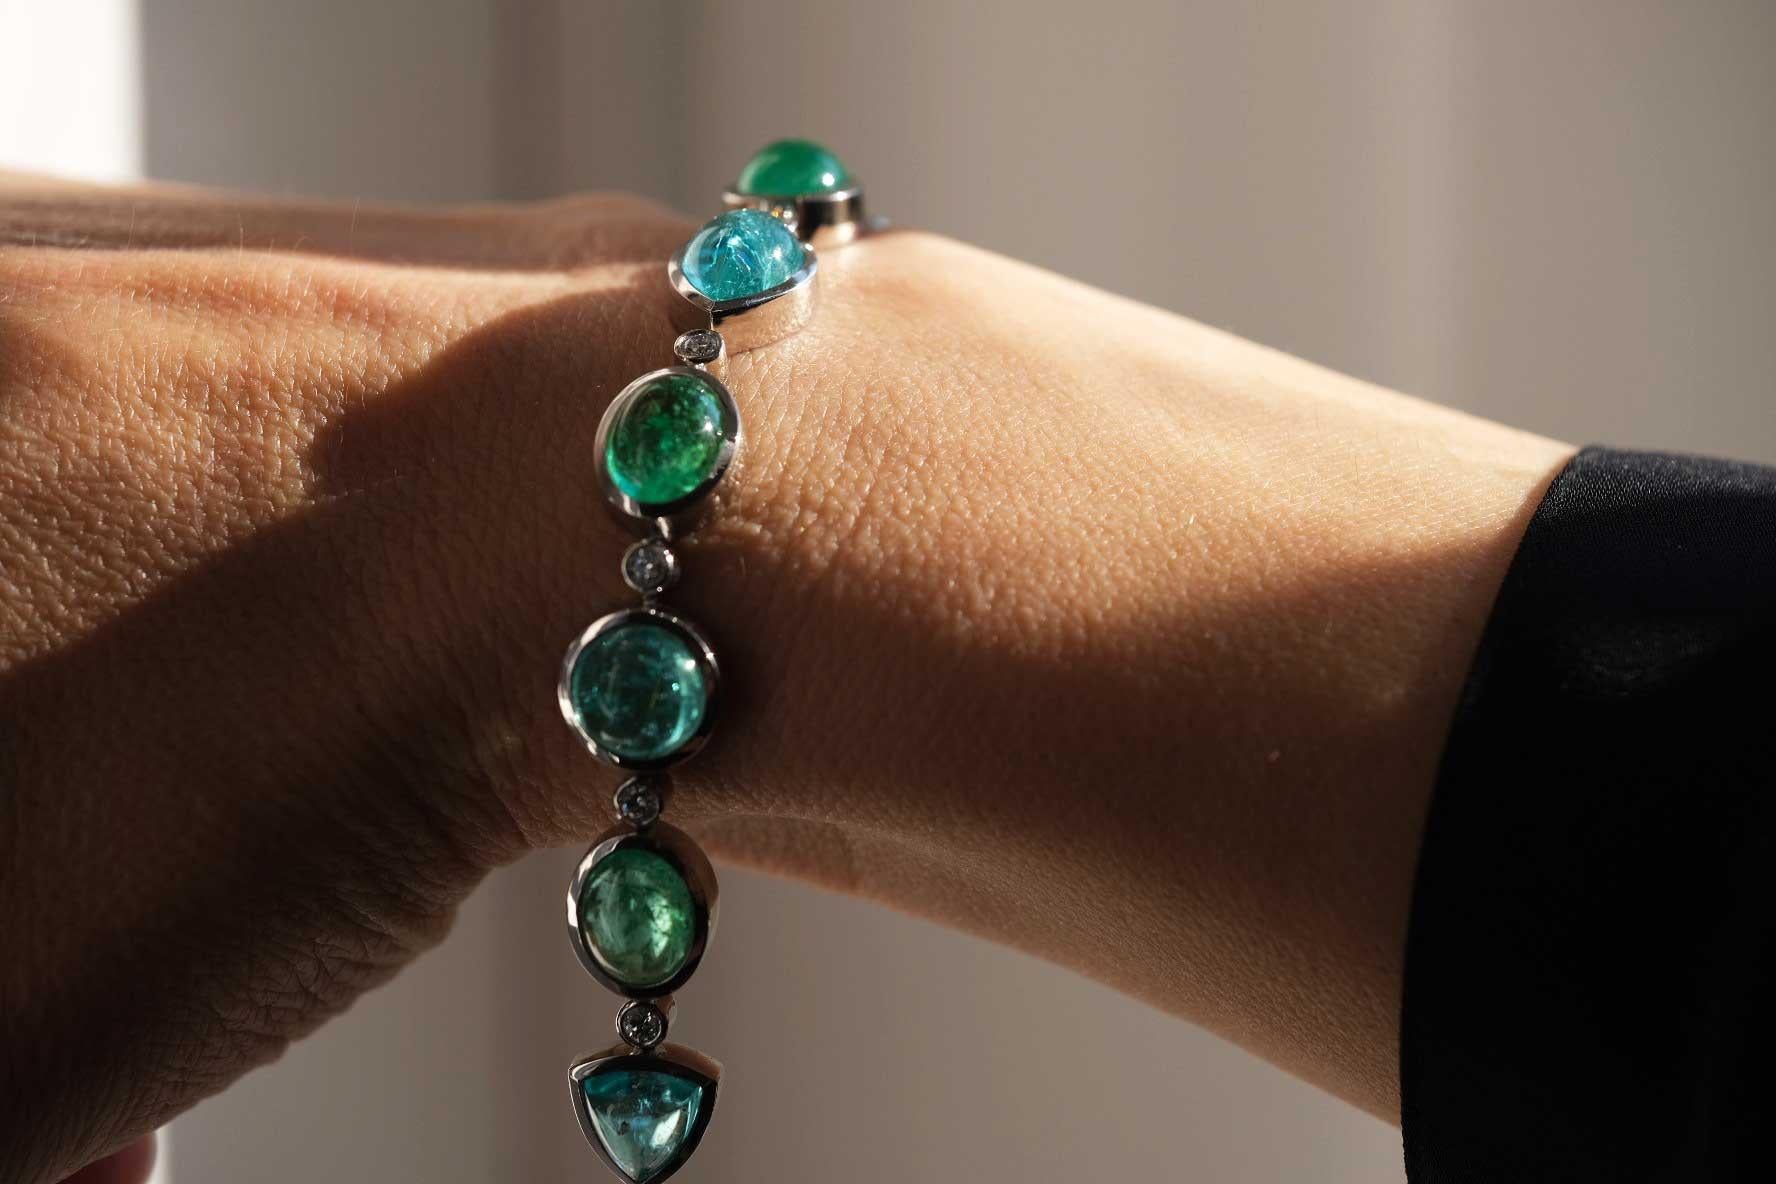 Contemporary Bracelet in Platinum with 11 Paraiba Tourmaline Cabouchons and 80 Diamonds. For Sale